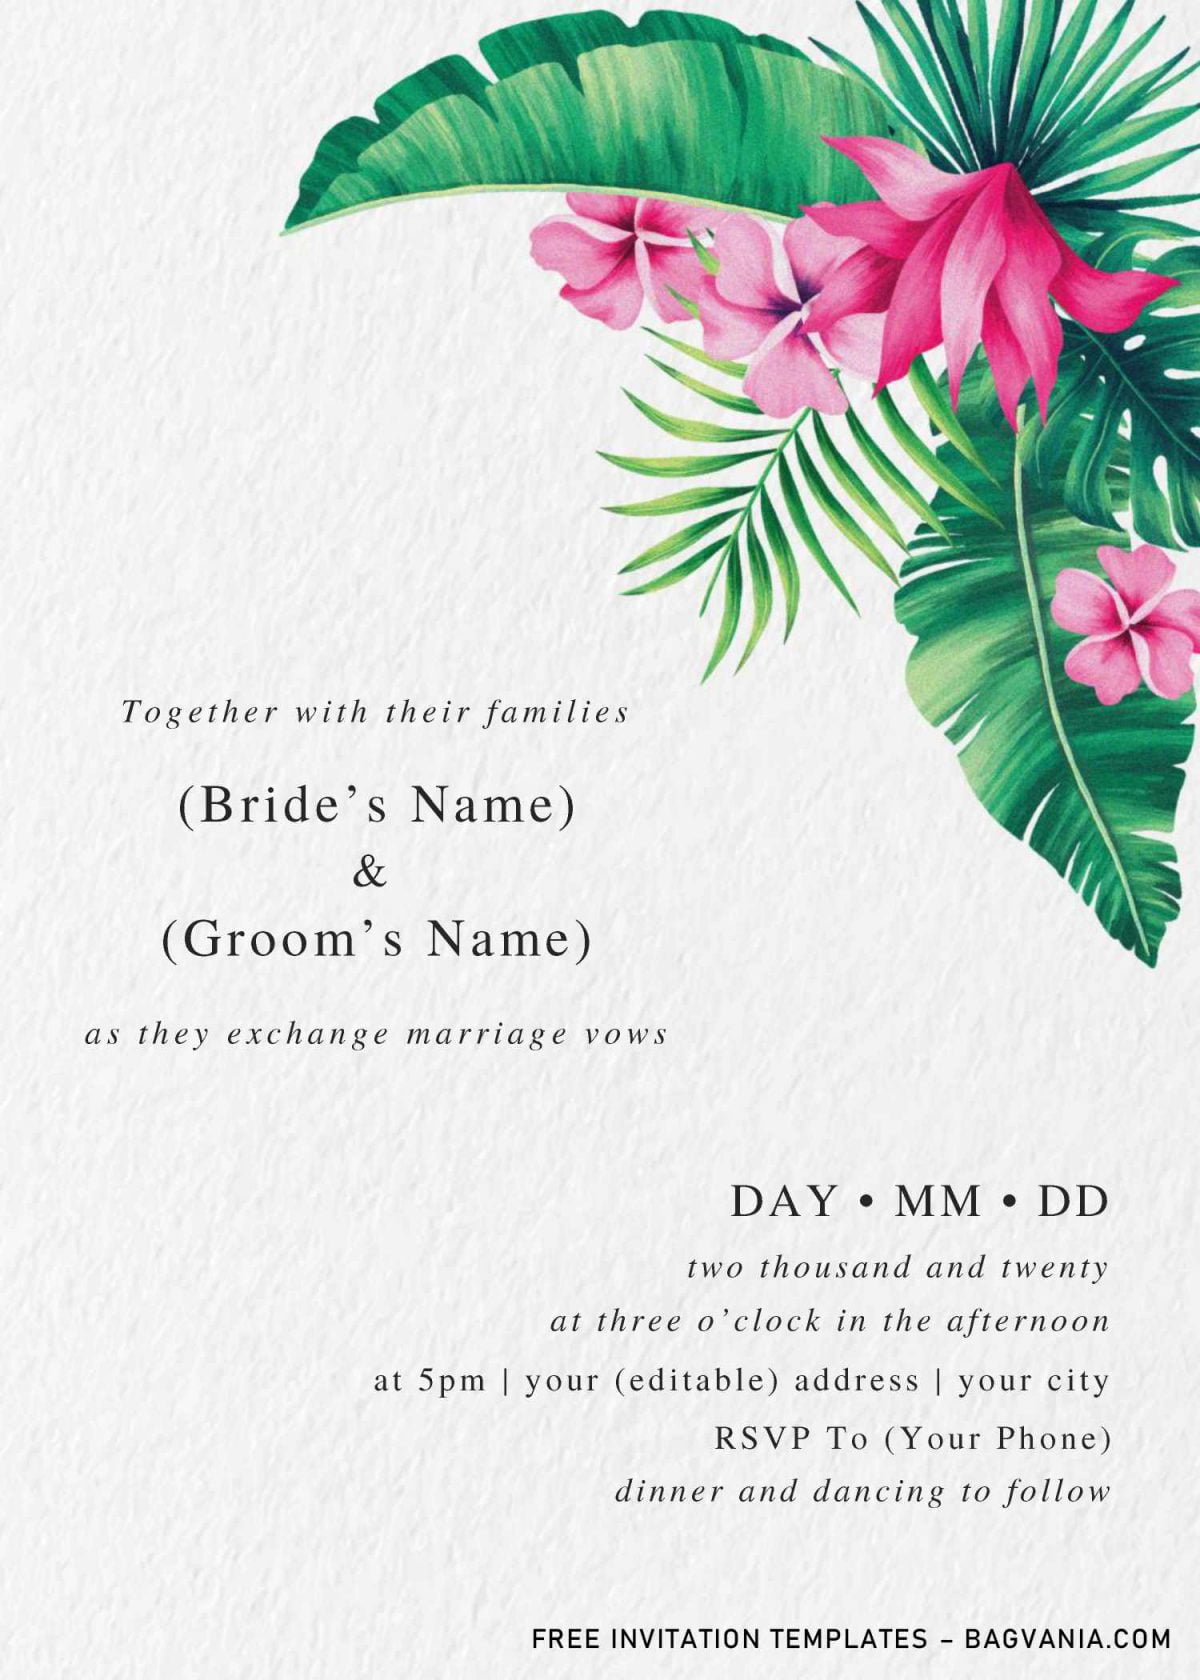 Modern Tropical Wedding Invitation Templates - Editable With MS Word and has monstera leaves